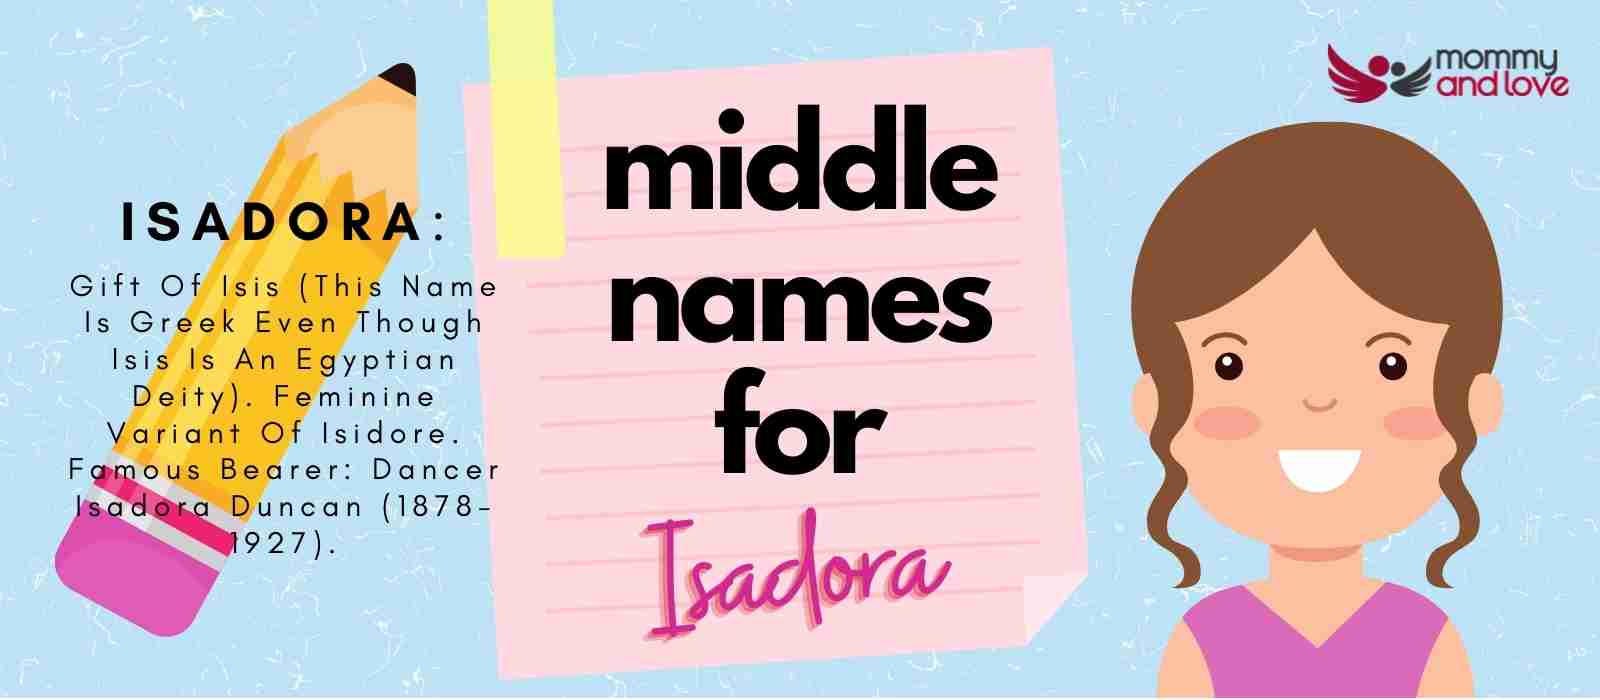 Middle Names for Isadora